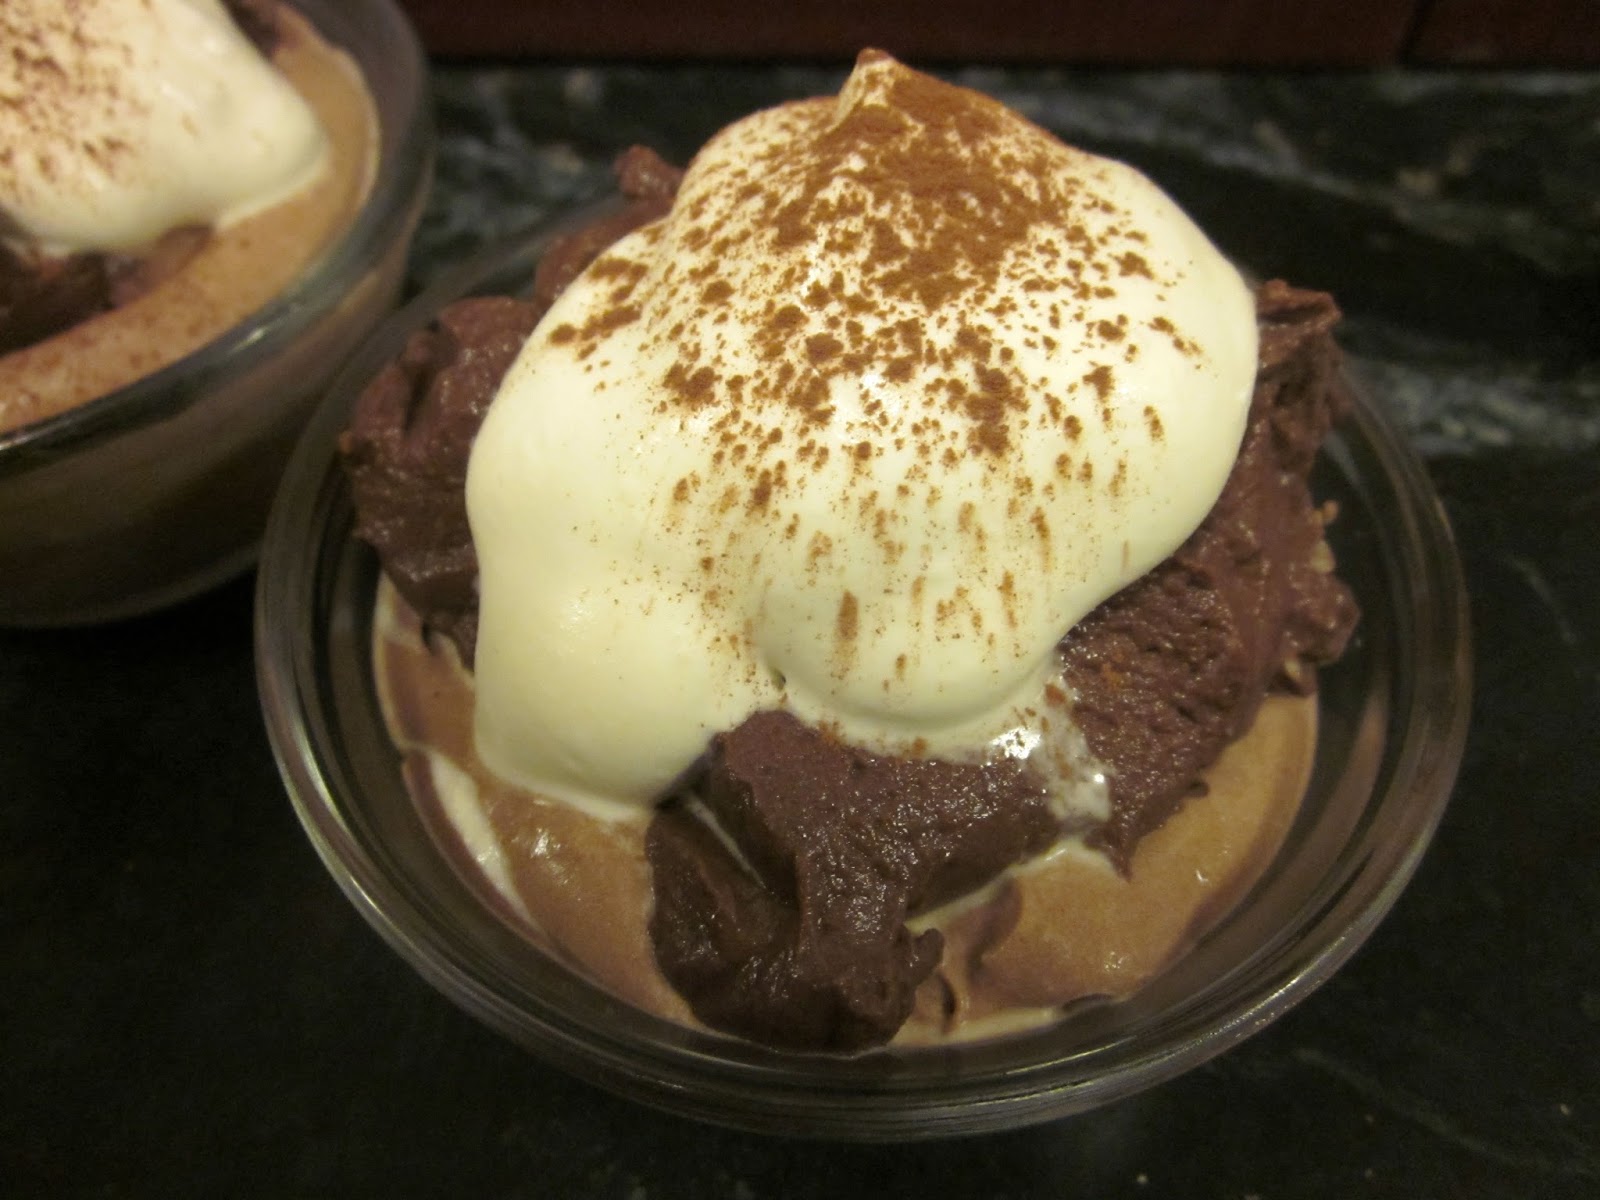 Chez Vorax -- Experiments in cooking: Chocolate Pudding from scratch